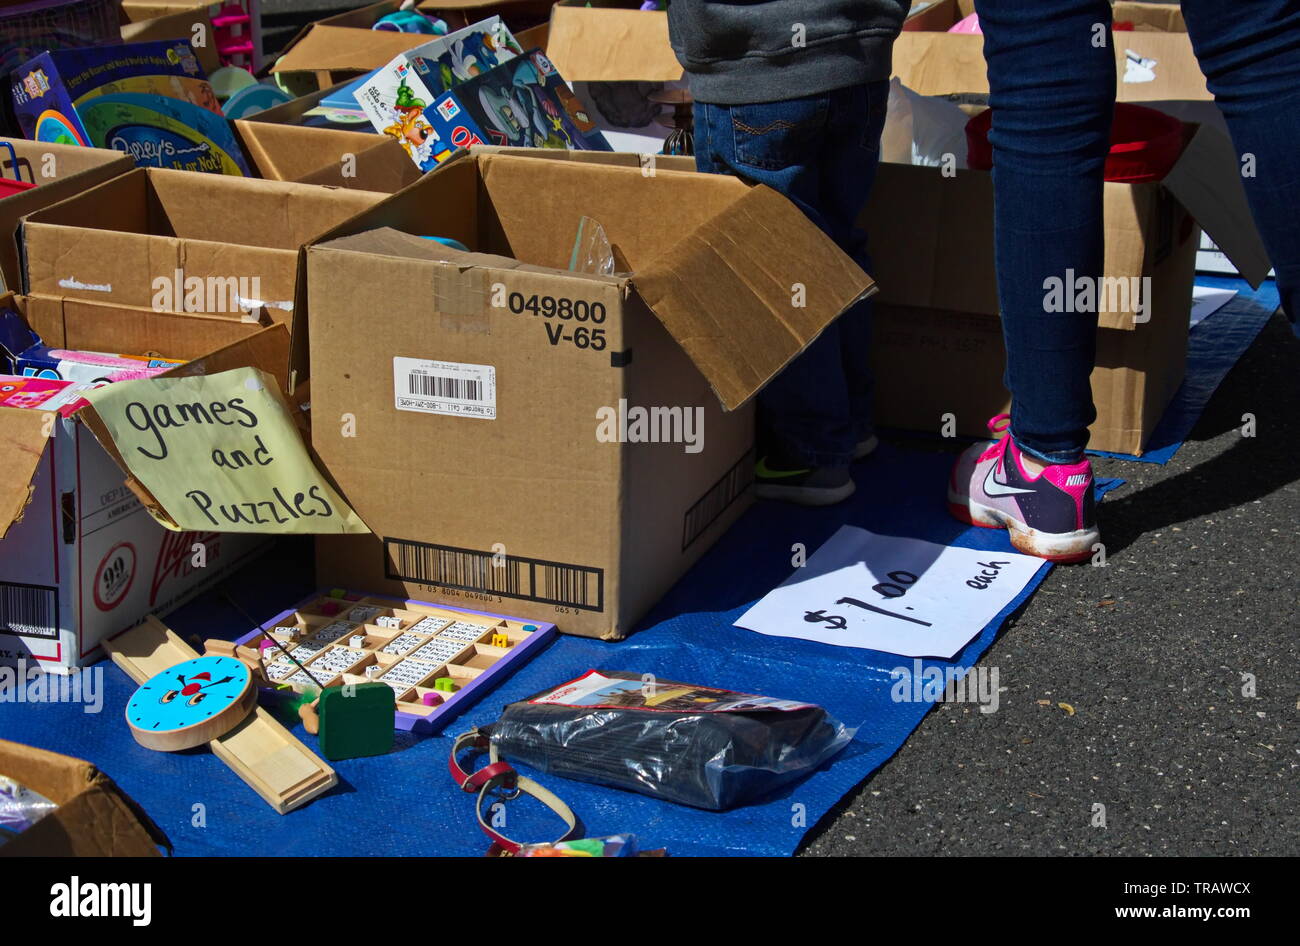 Middletown, Connecticut / USA - May 18, 2019: Mother and son looking through the boxes of toys on display at a yard sale Stock Photo